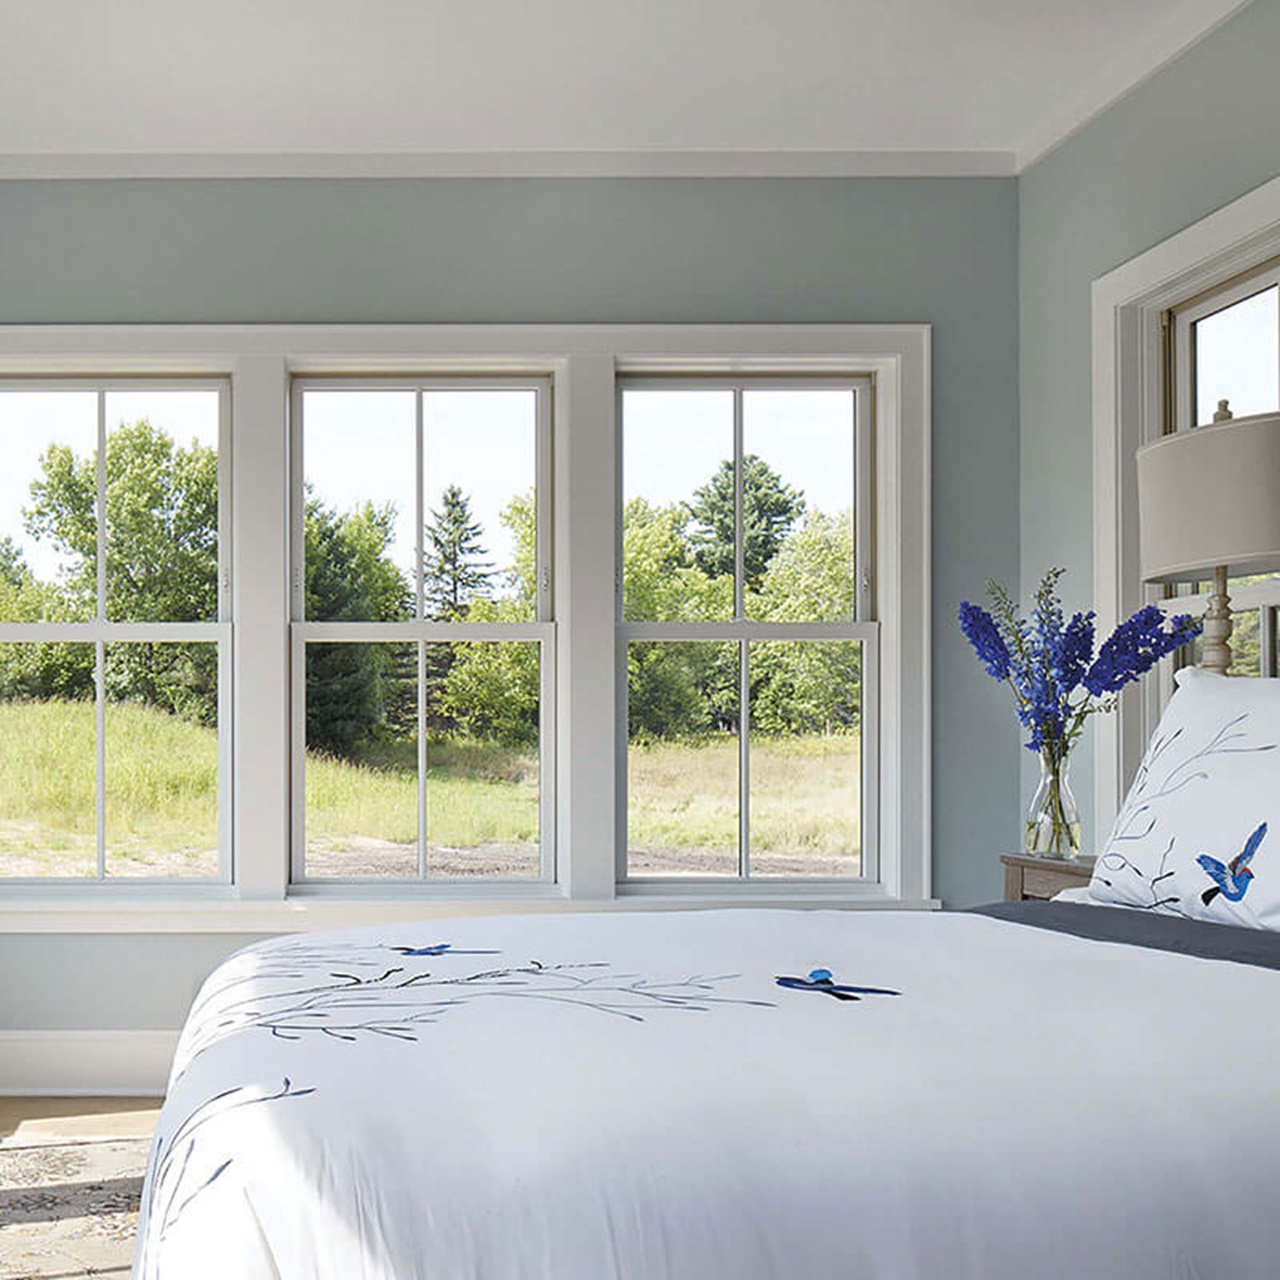 Bright Bedroom With Marvin Elevate Double Hung Windows